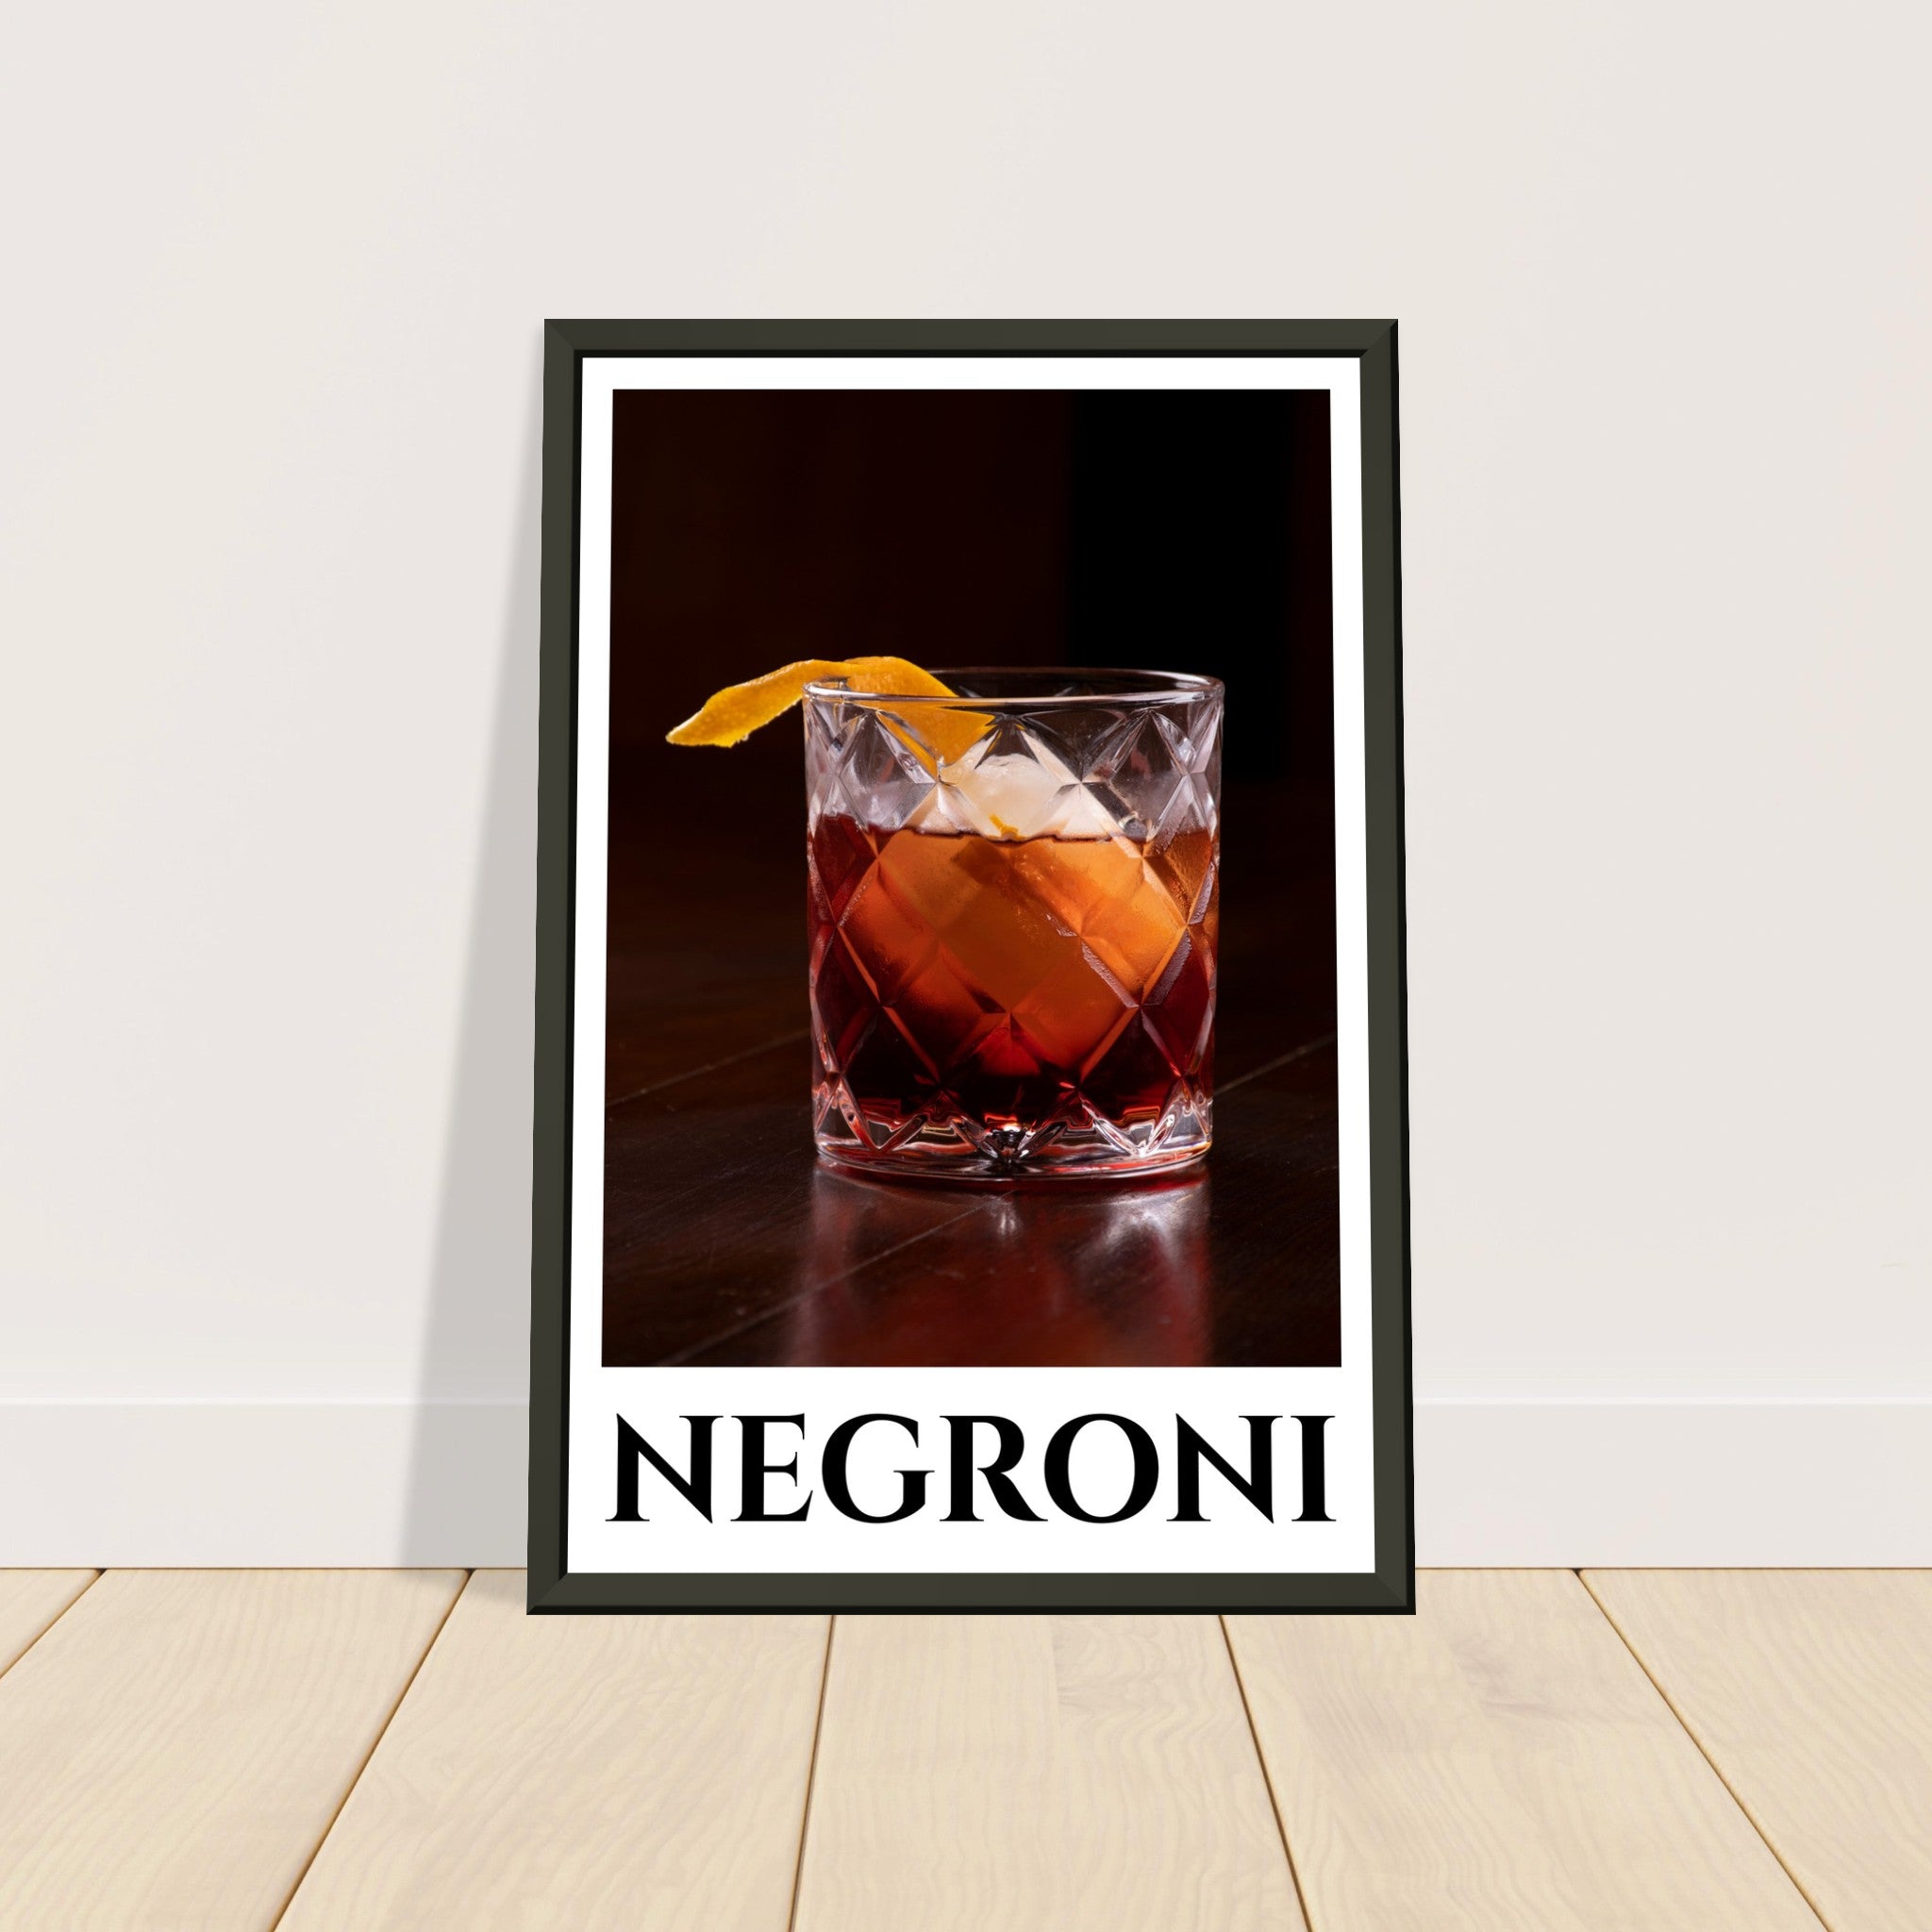 Bold Flavors Captured: The Classic Negroni Poster